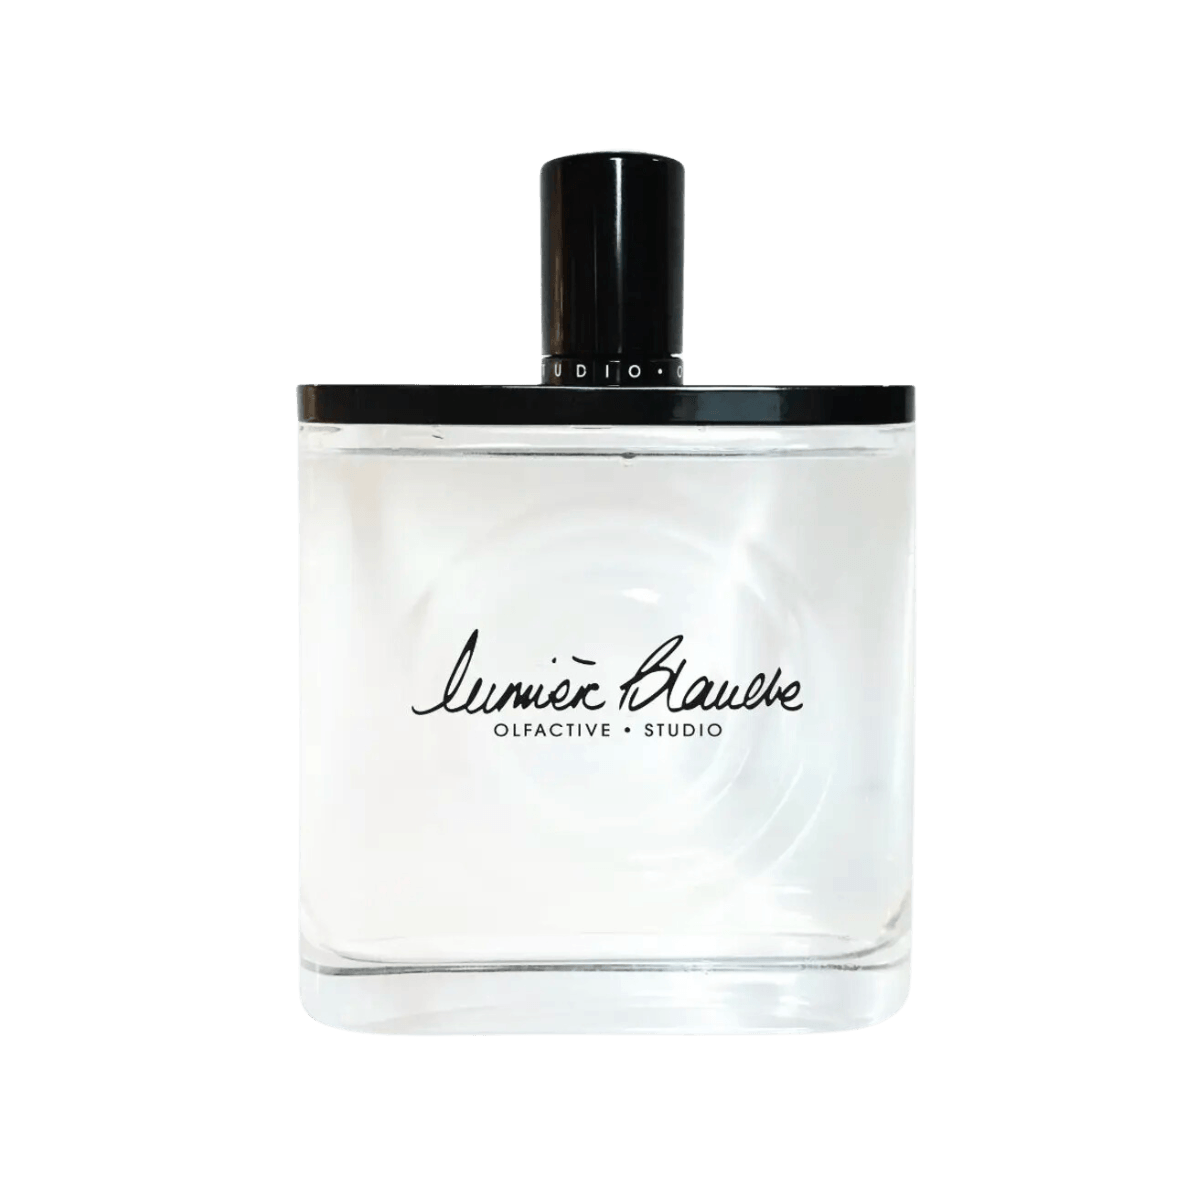 Image of Lumiere Blanche 100 ml by Olfactive Studio